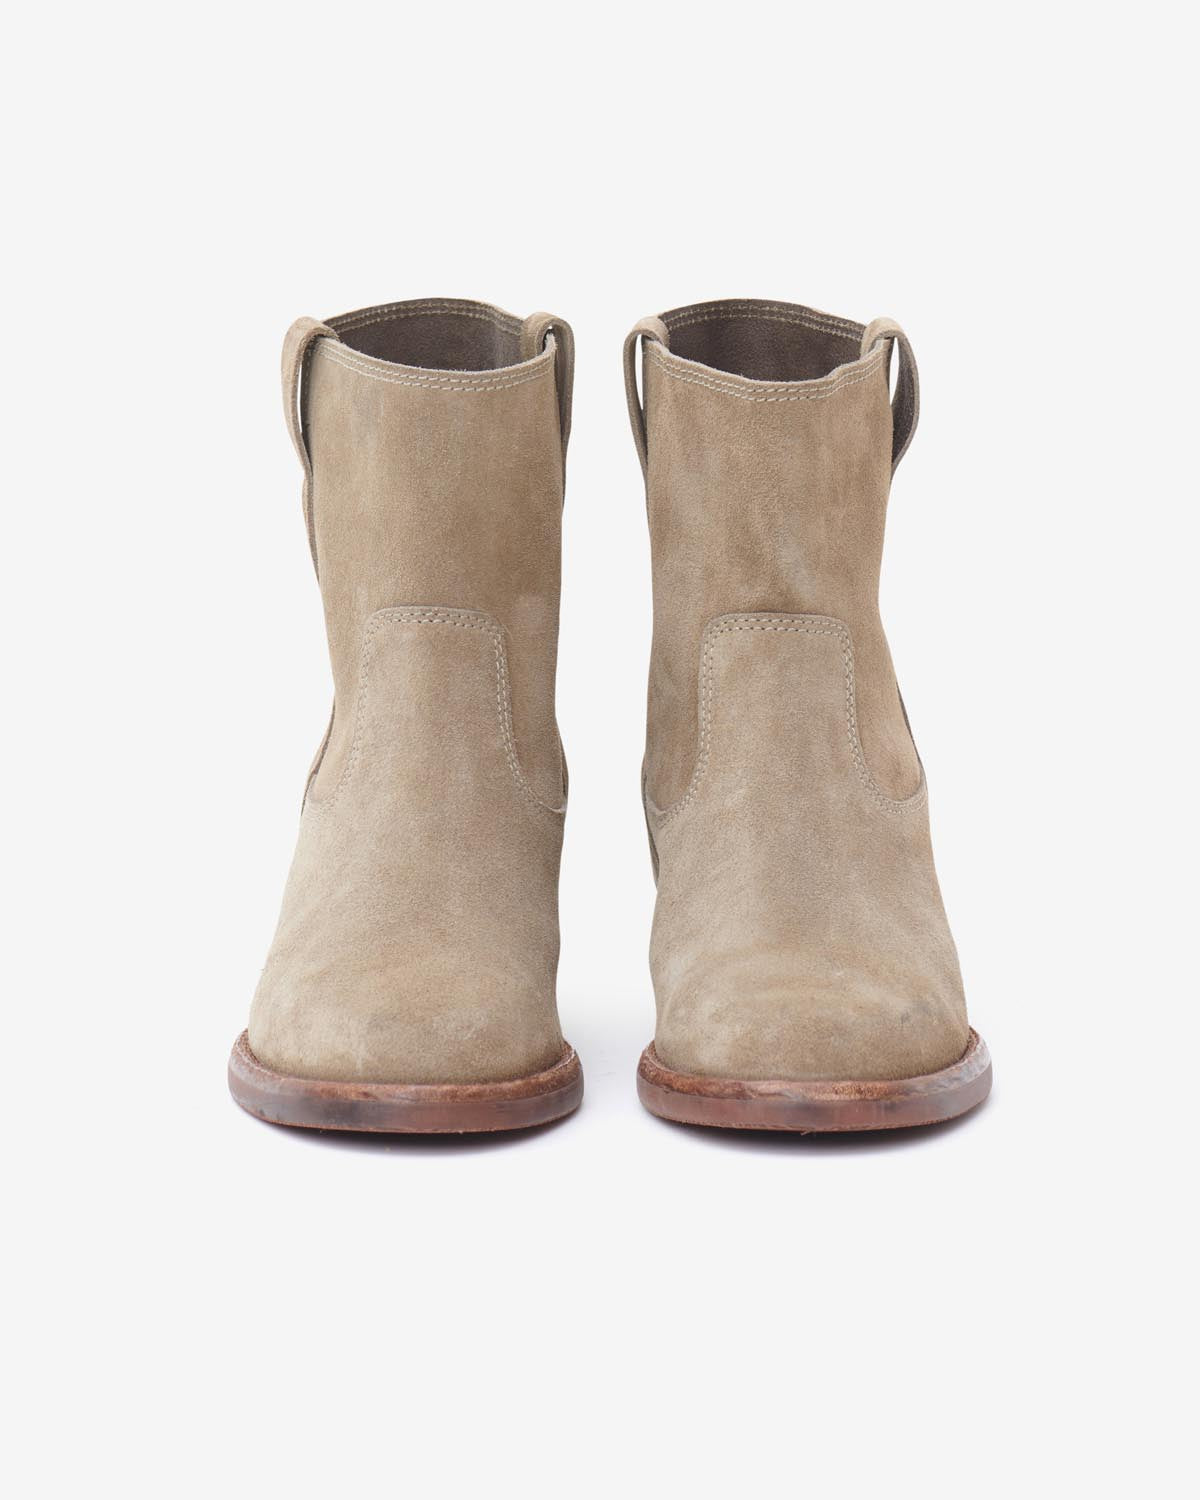 Stiefeletten susee Woman Taupe 3